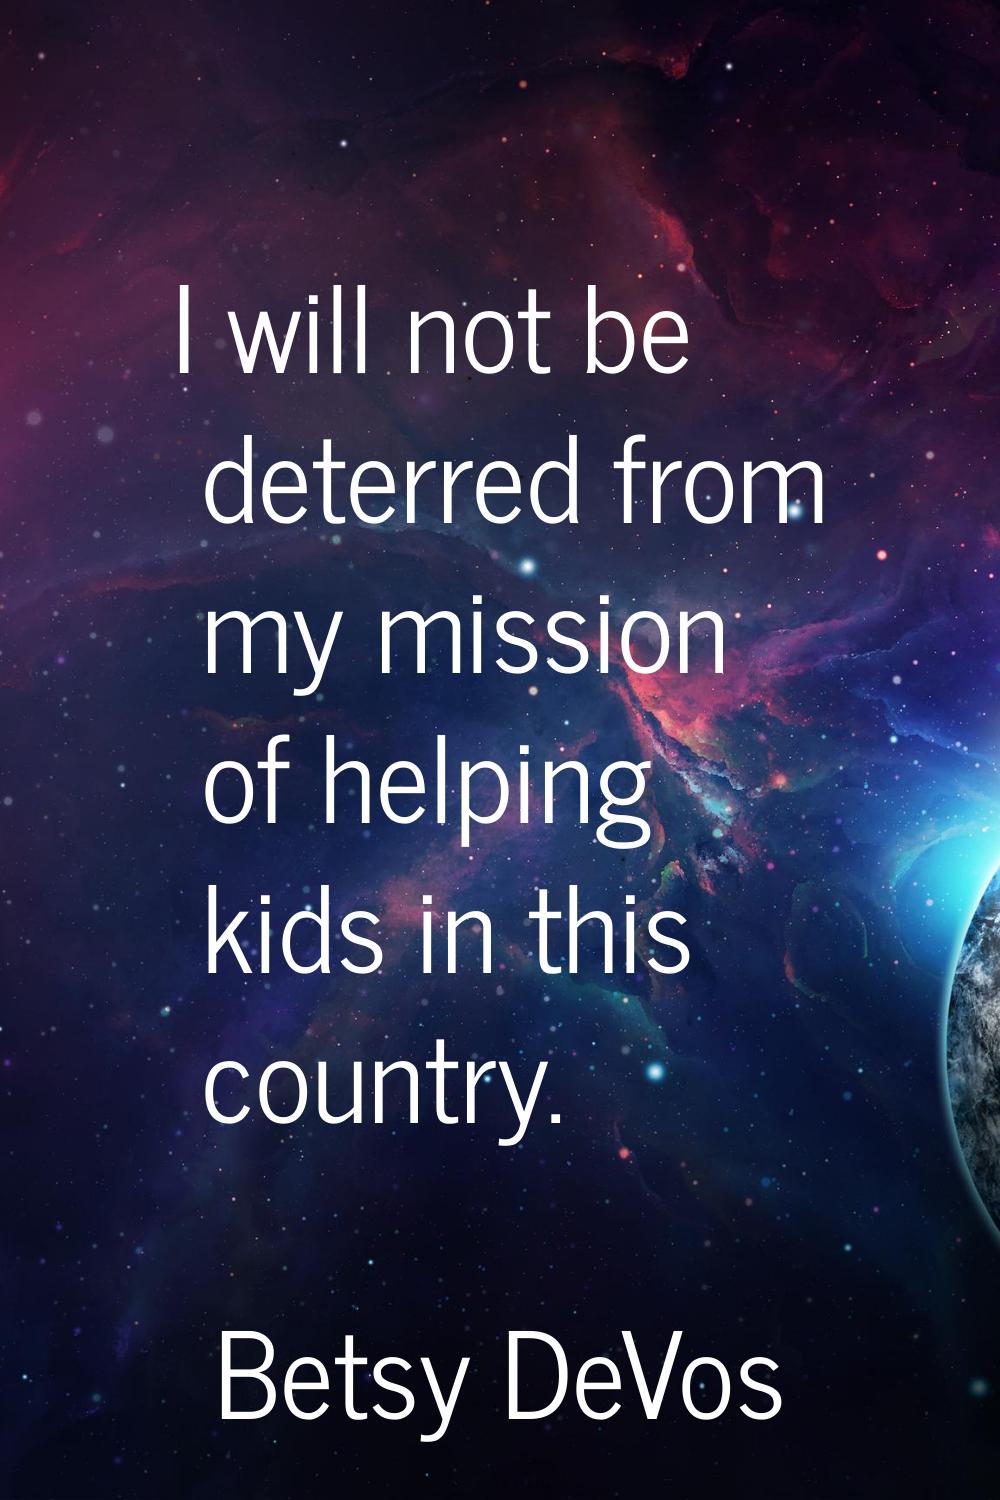 I will not be deterred from my mission of helping kids in this country.